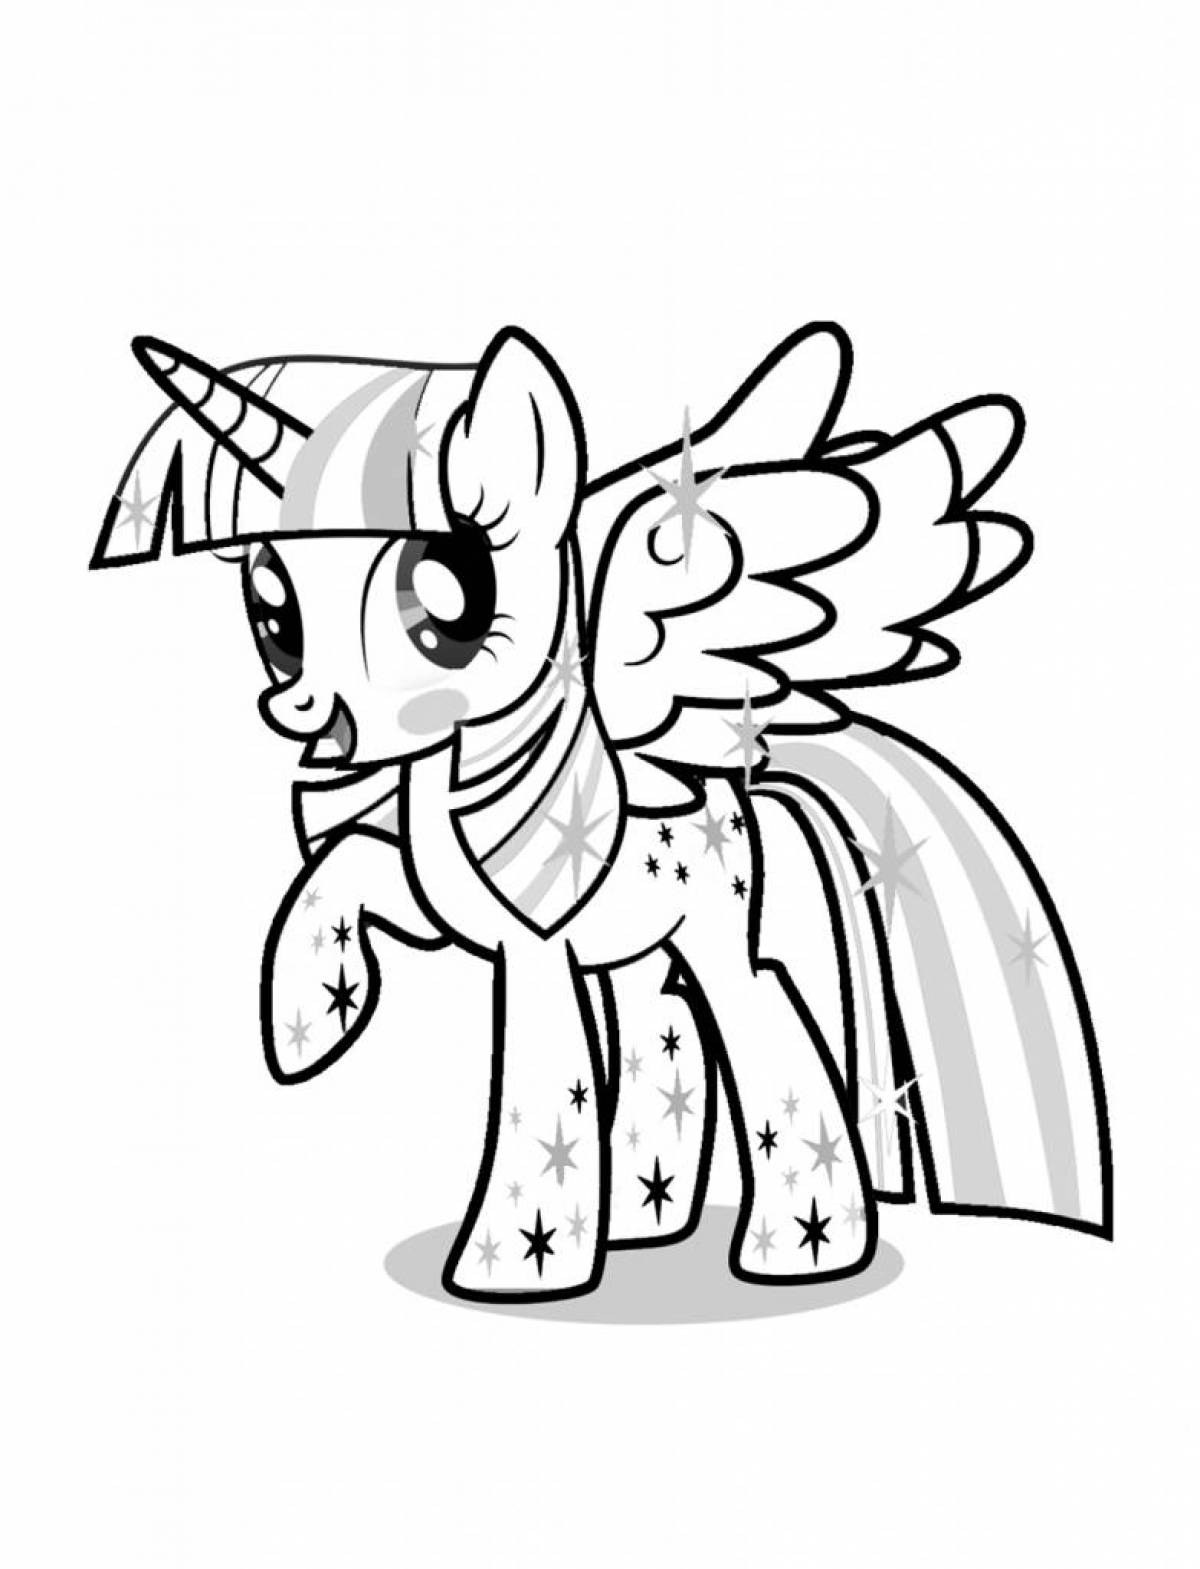 Charming pony sparkle coloring book